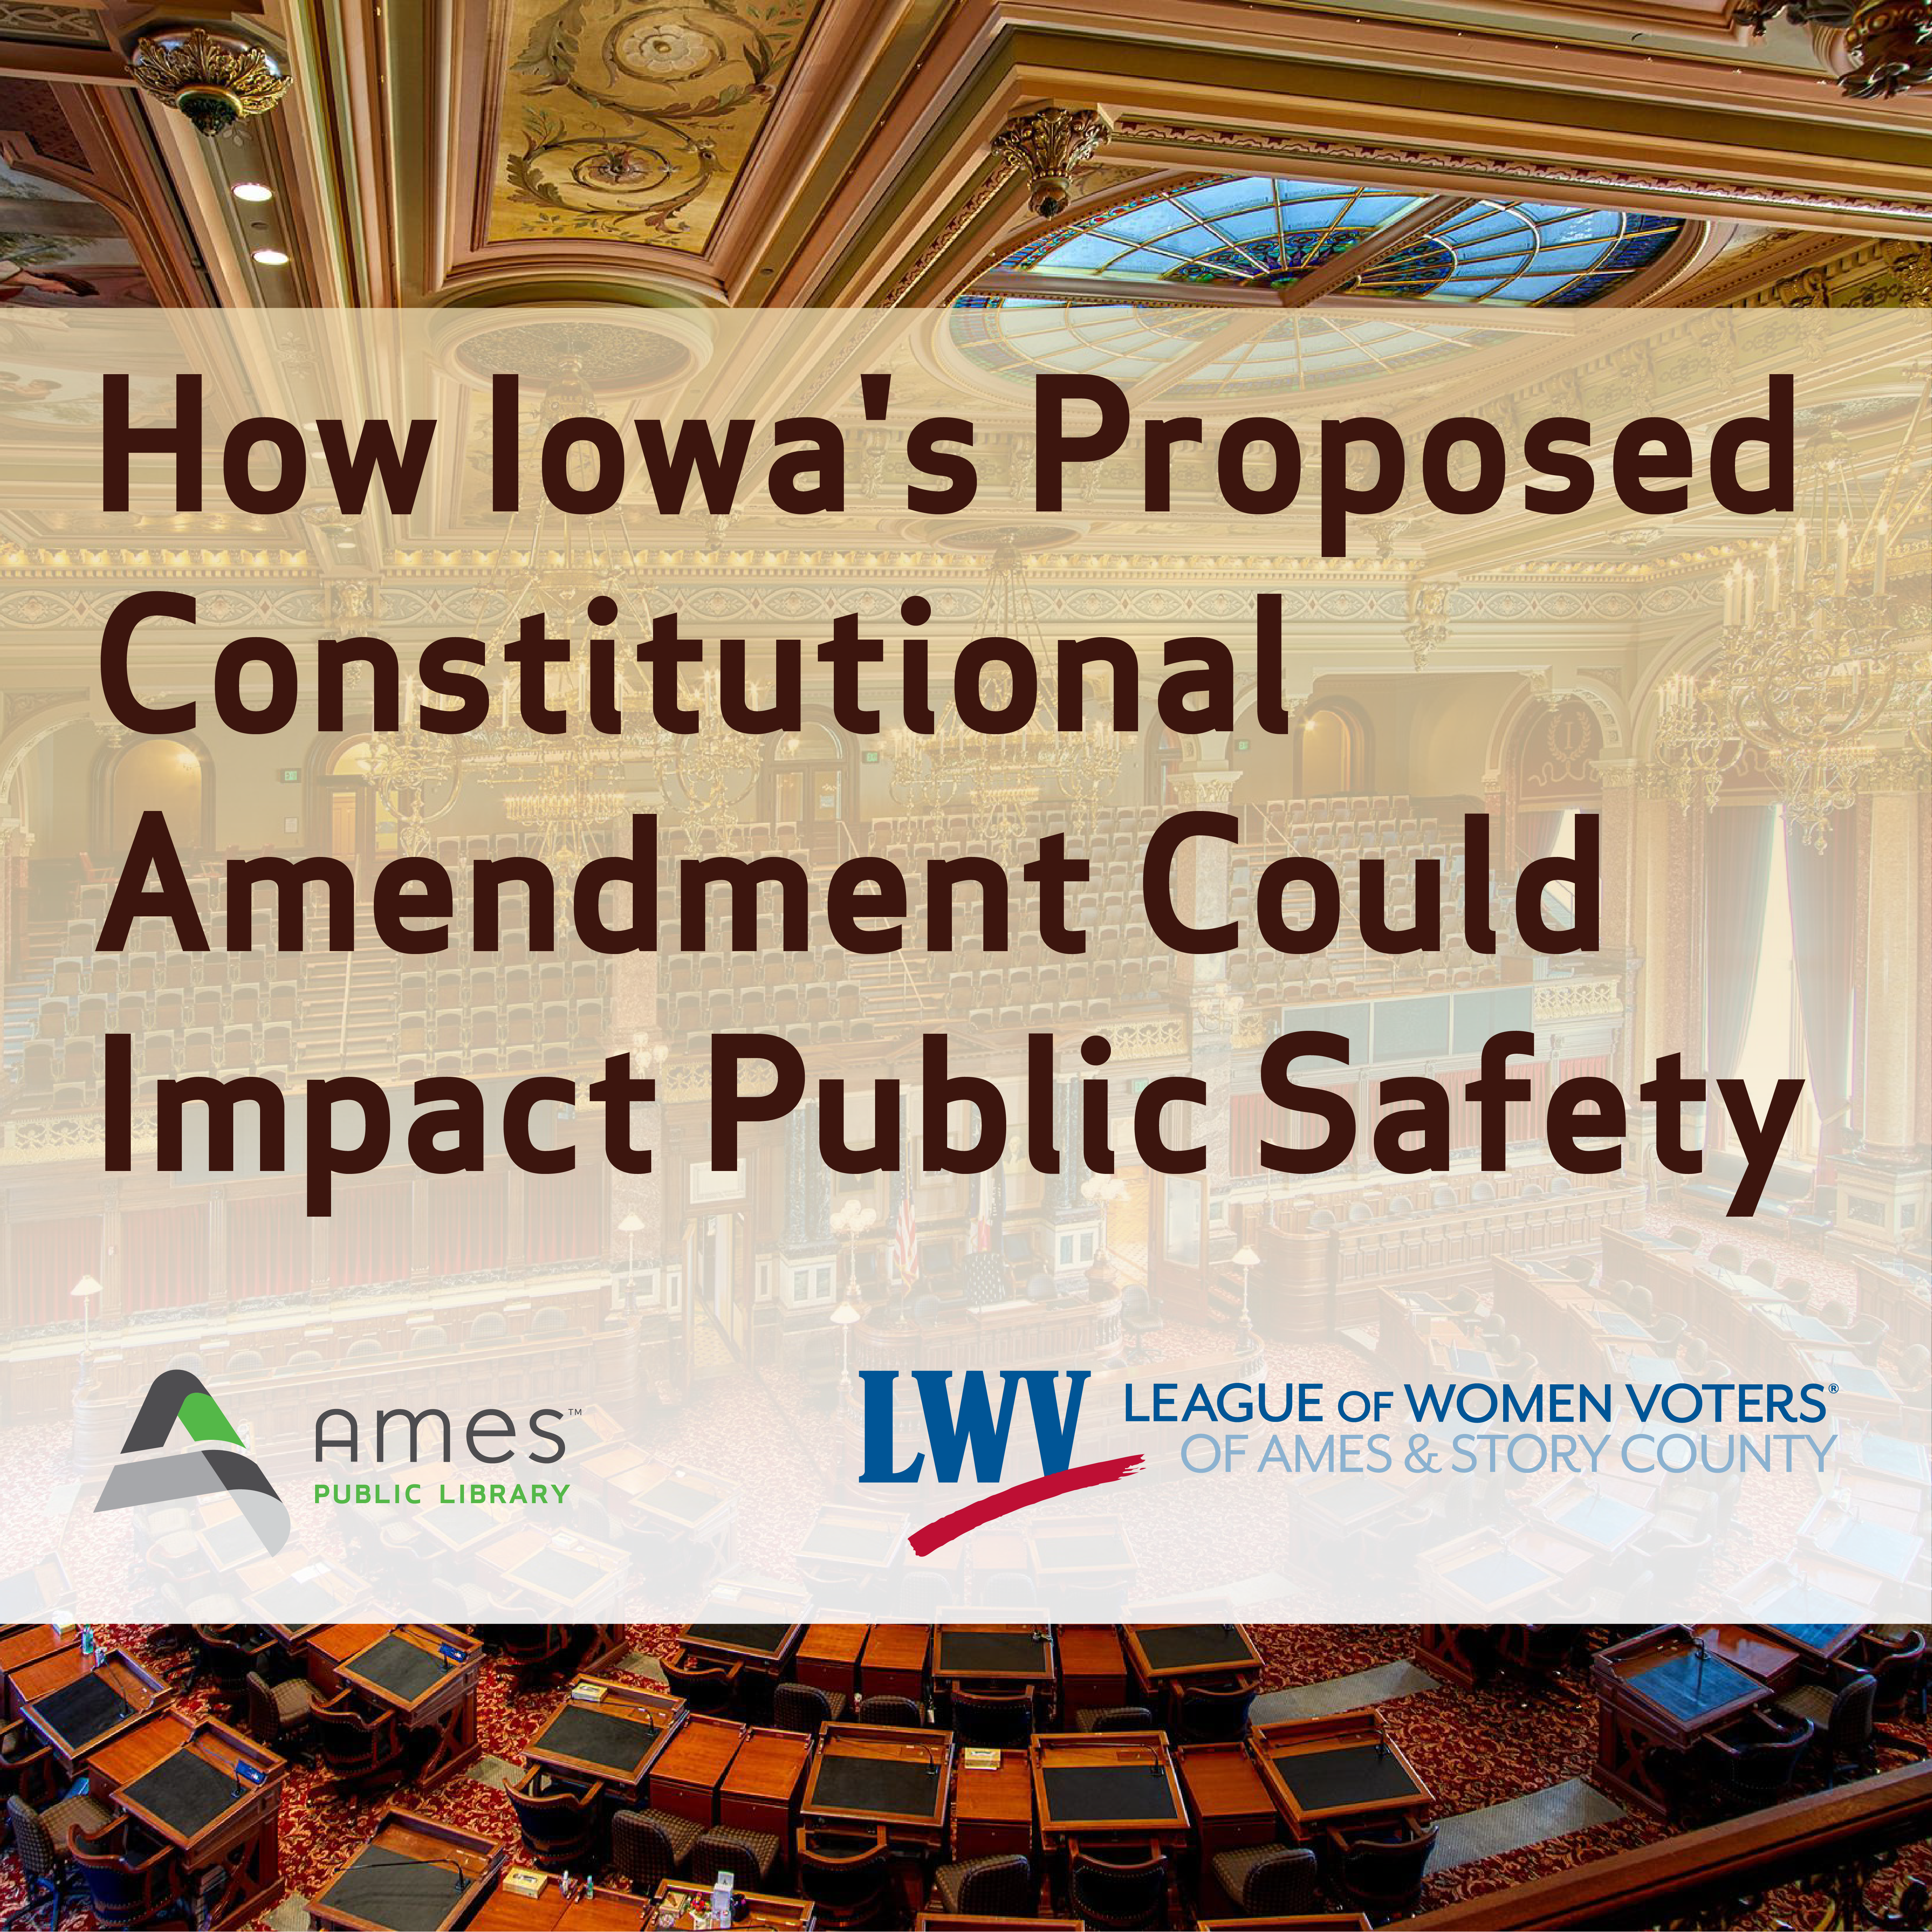 How Iowa's Proposed Constitutional Amendment Could Impact Public Safety. Image features Senate Chamber of Iowa Capitol in Des Moines